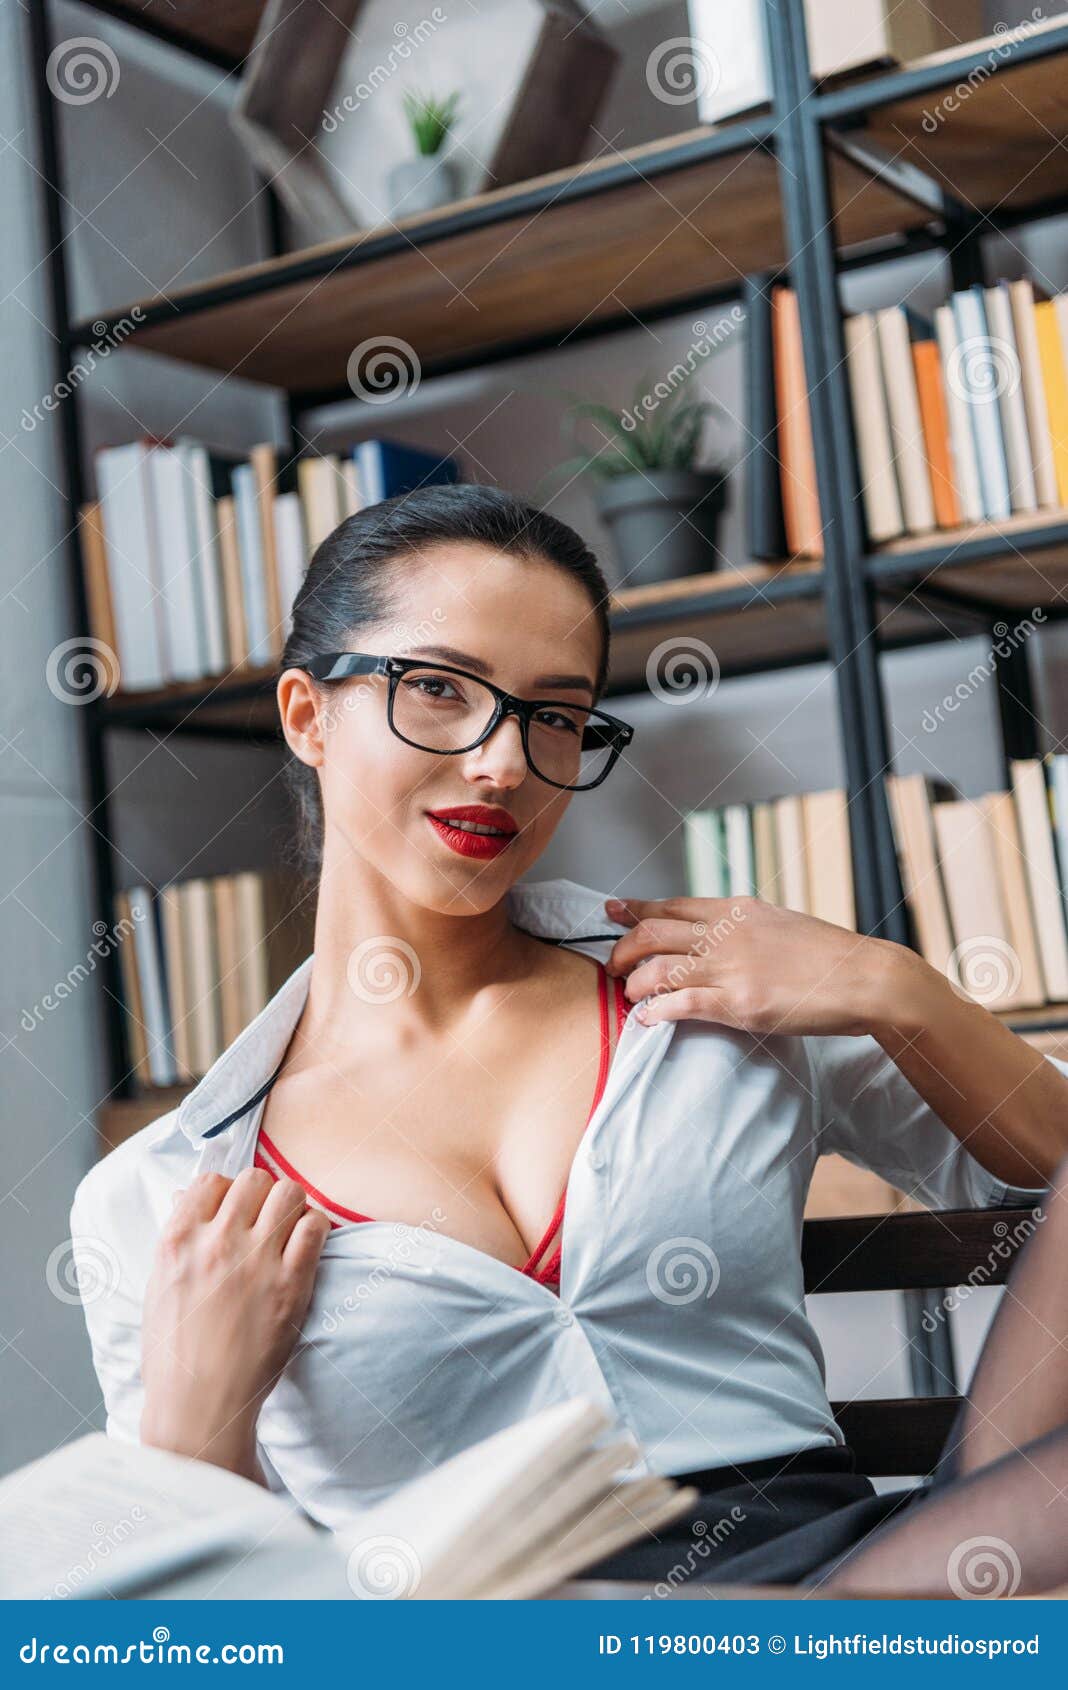 aaron carrington recommends big boobs in library pic